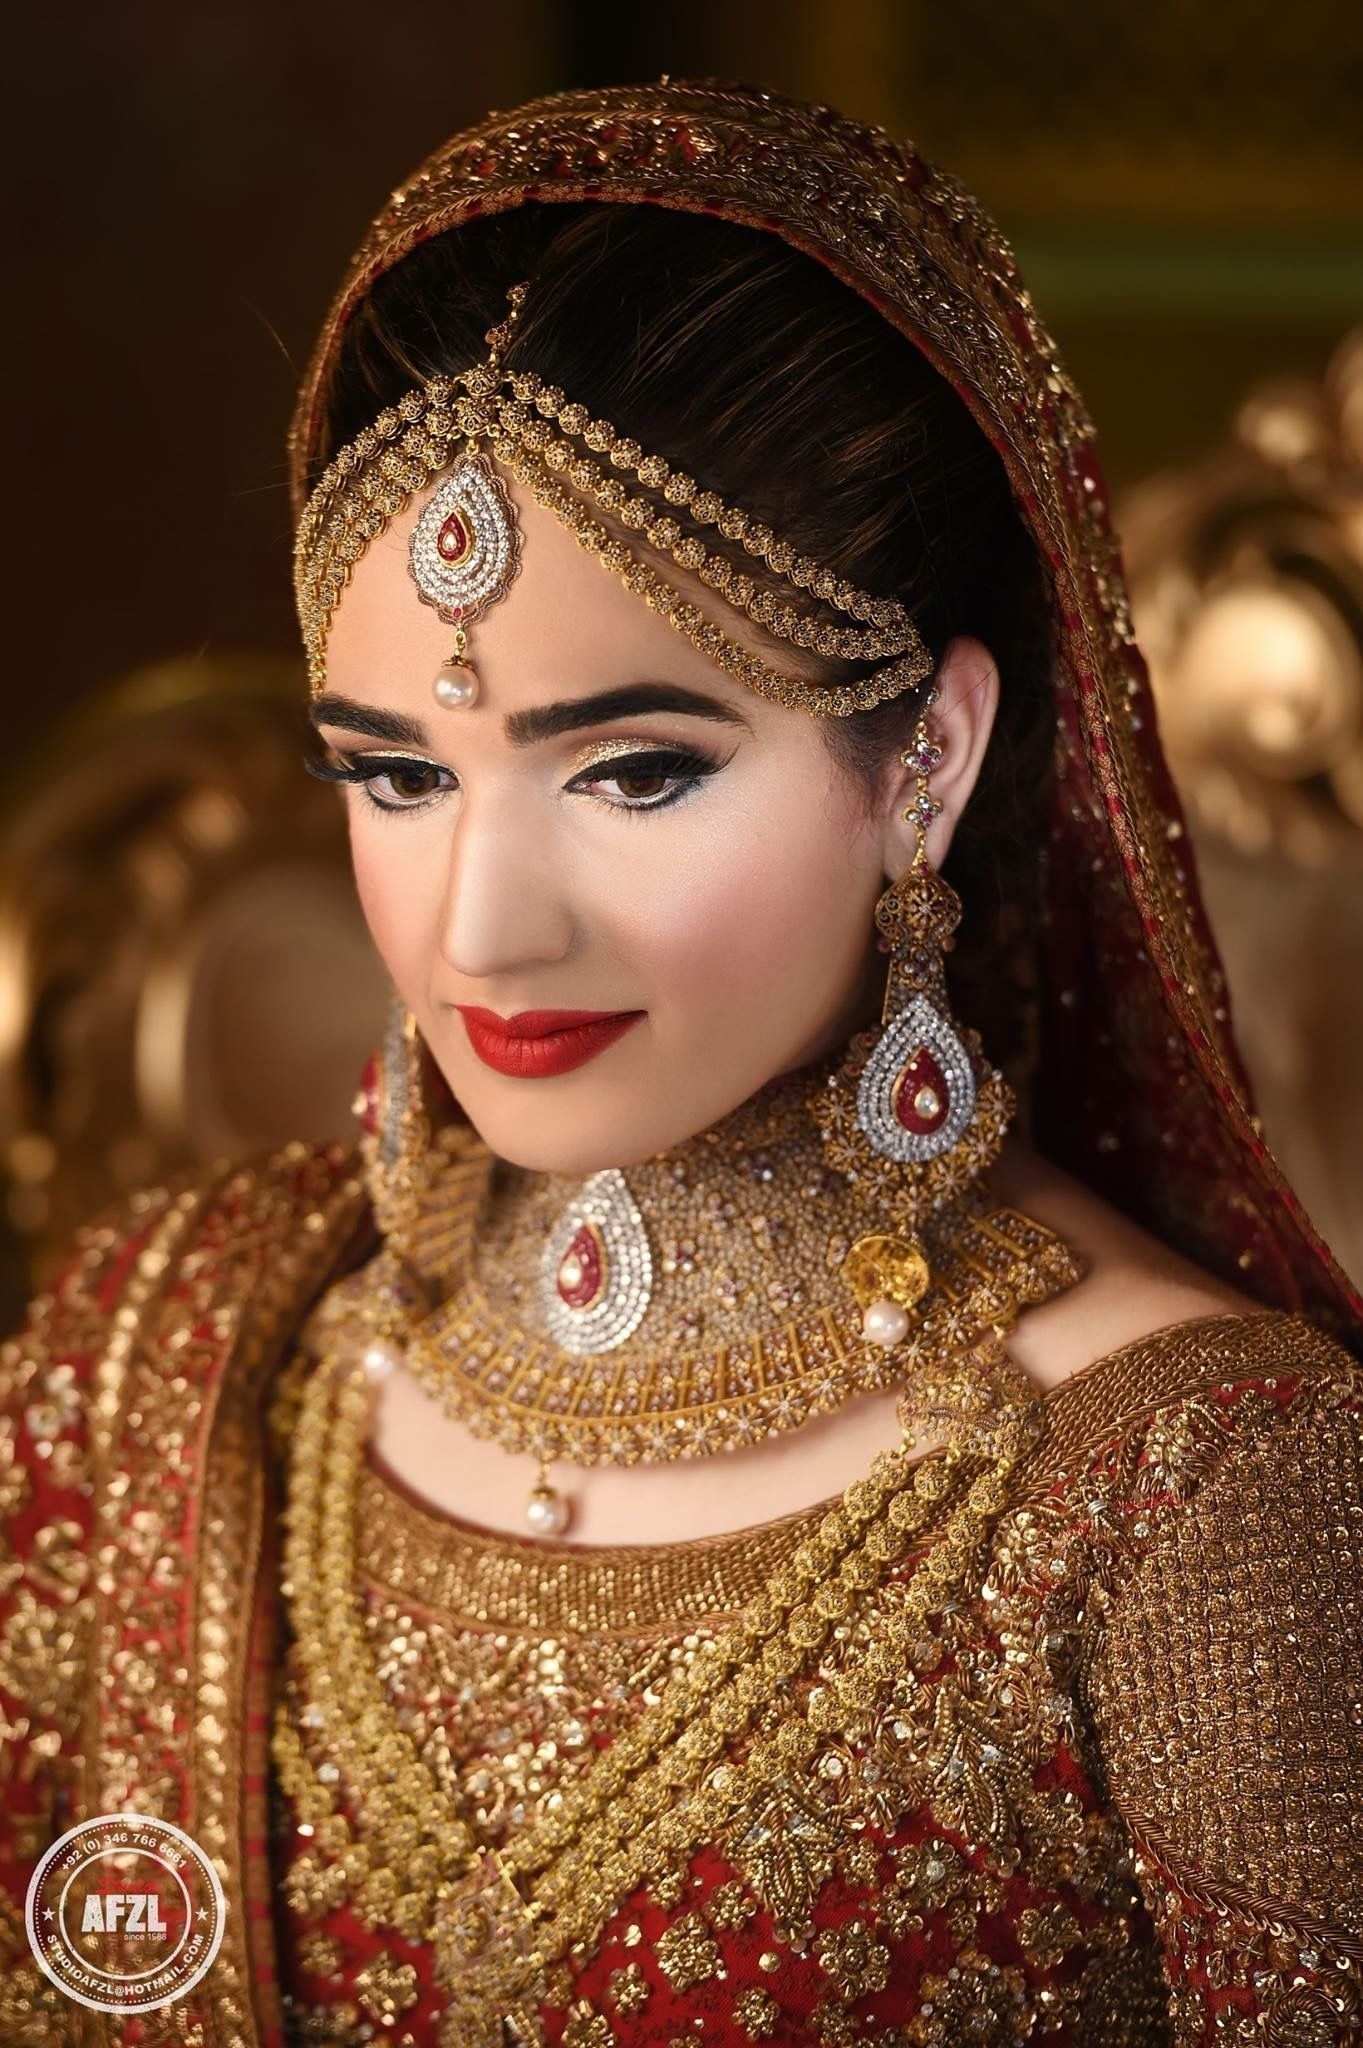 Pin By Laiqa On Pakistani Wedding'S | Indian Bridal Makeup within Indian Bridal Hair And Makeup Chicago